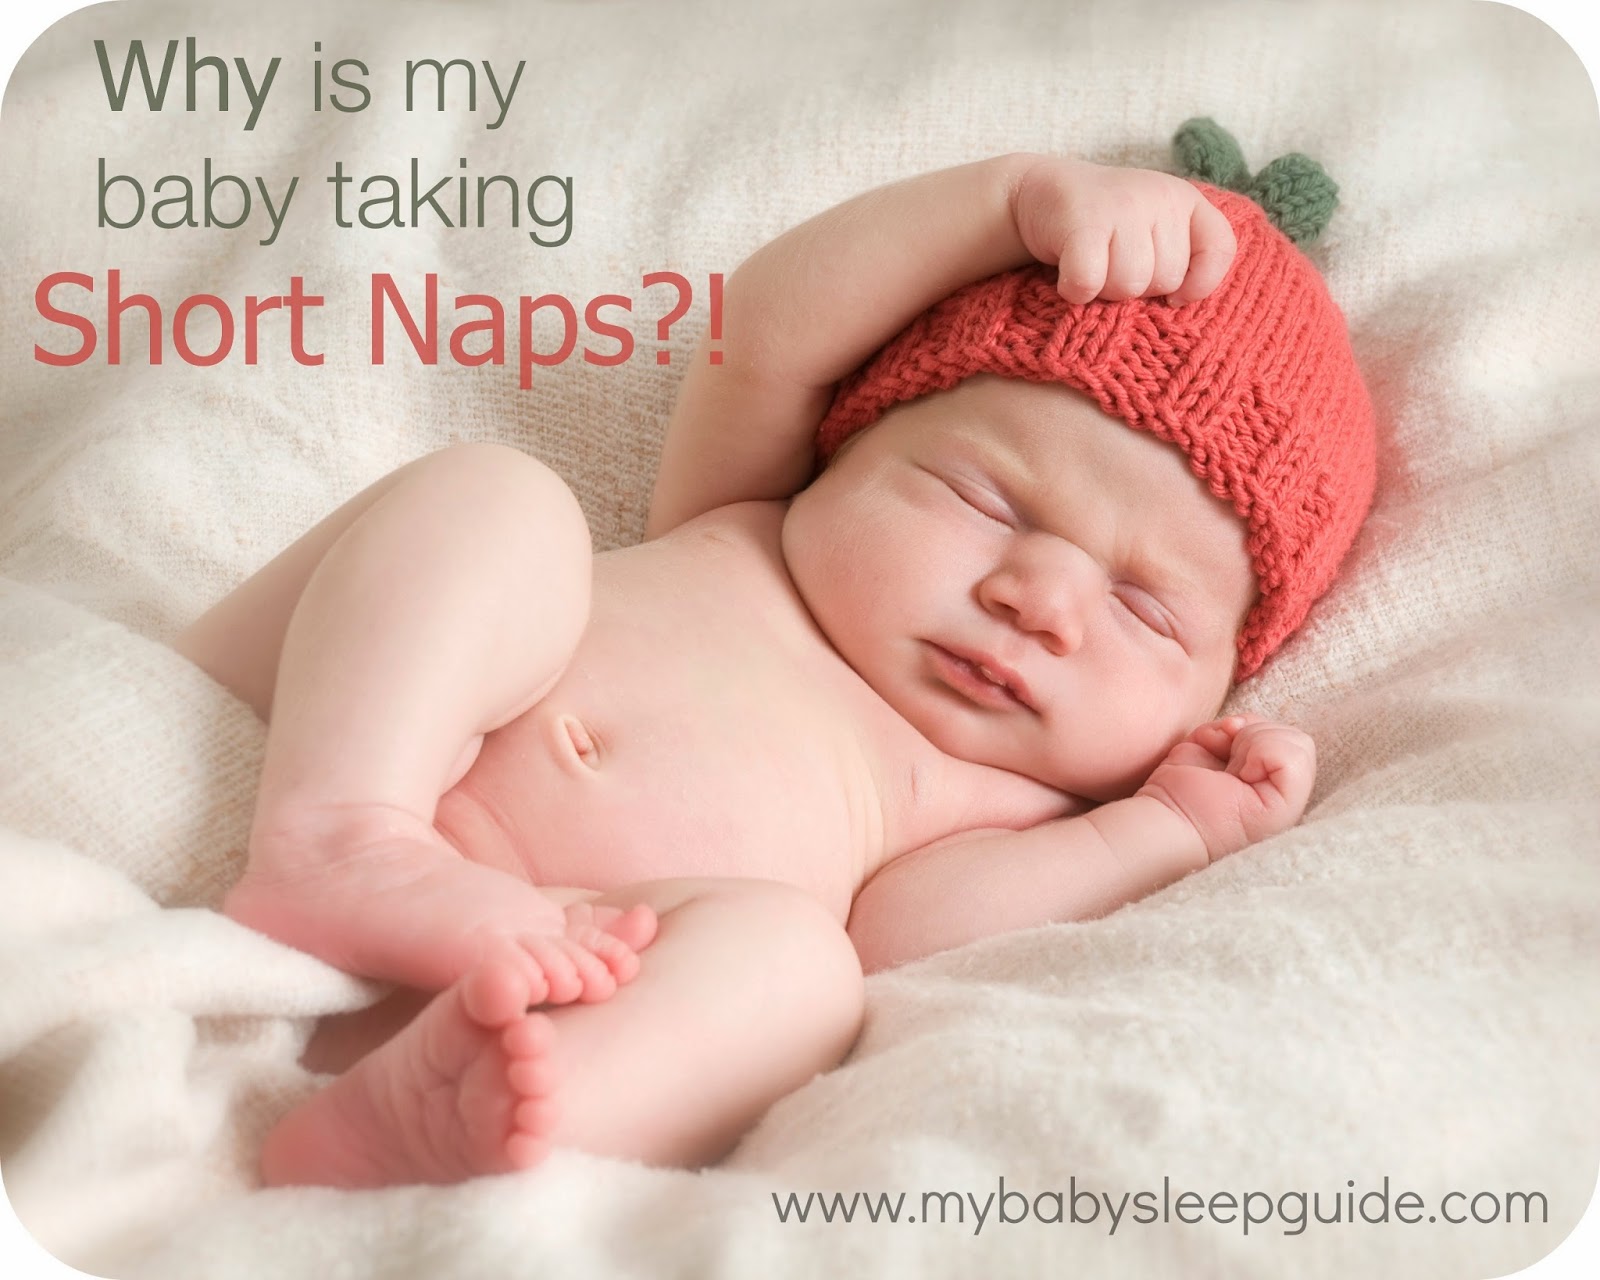 6 Reasons Why a Baby Humps + What to Do About It - Coping with Lindsey